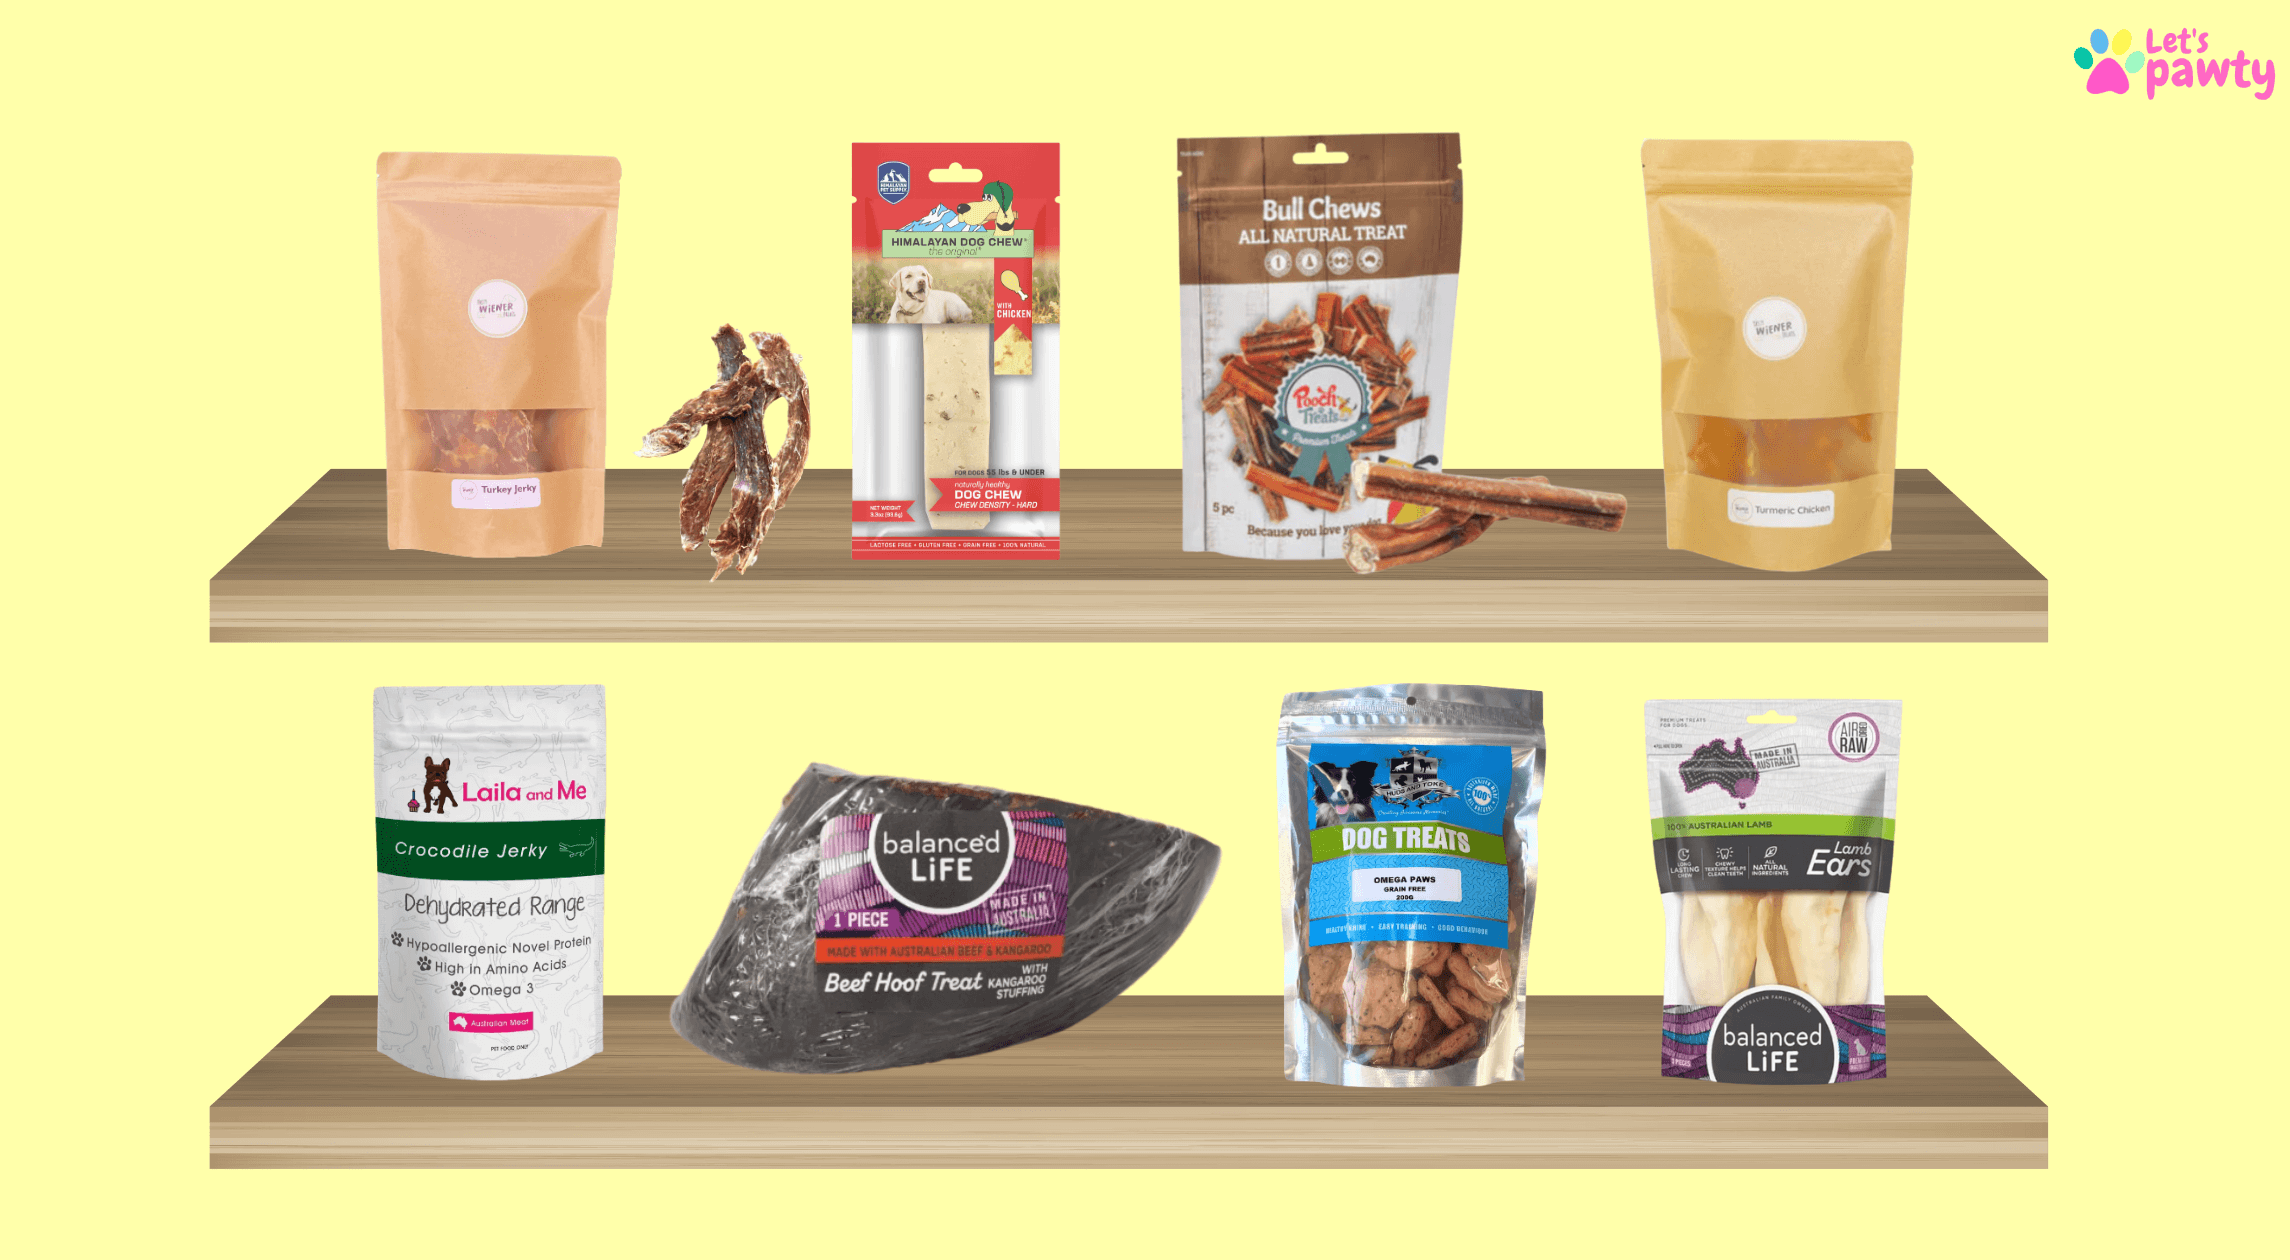 Gus recommended treats that are safe for dogs